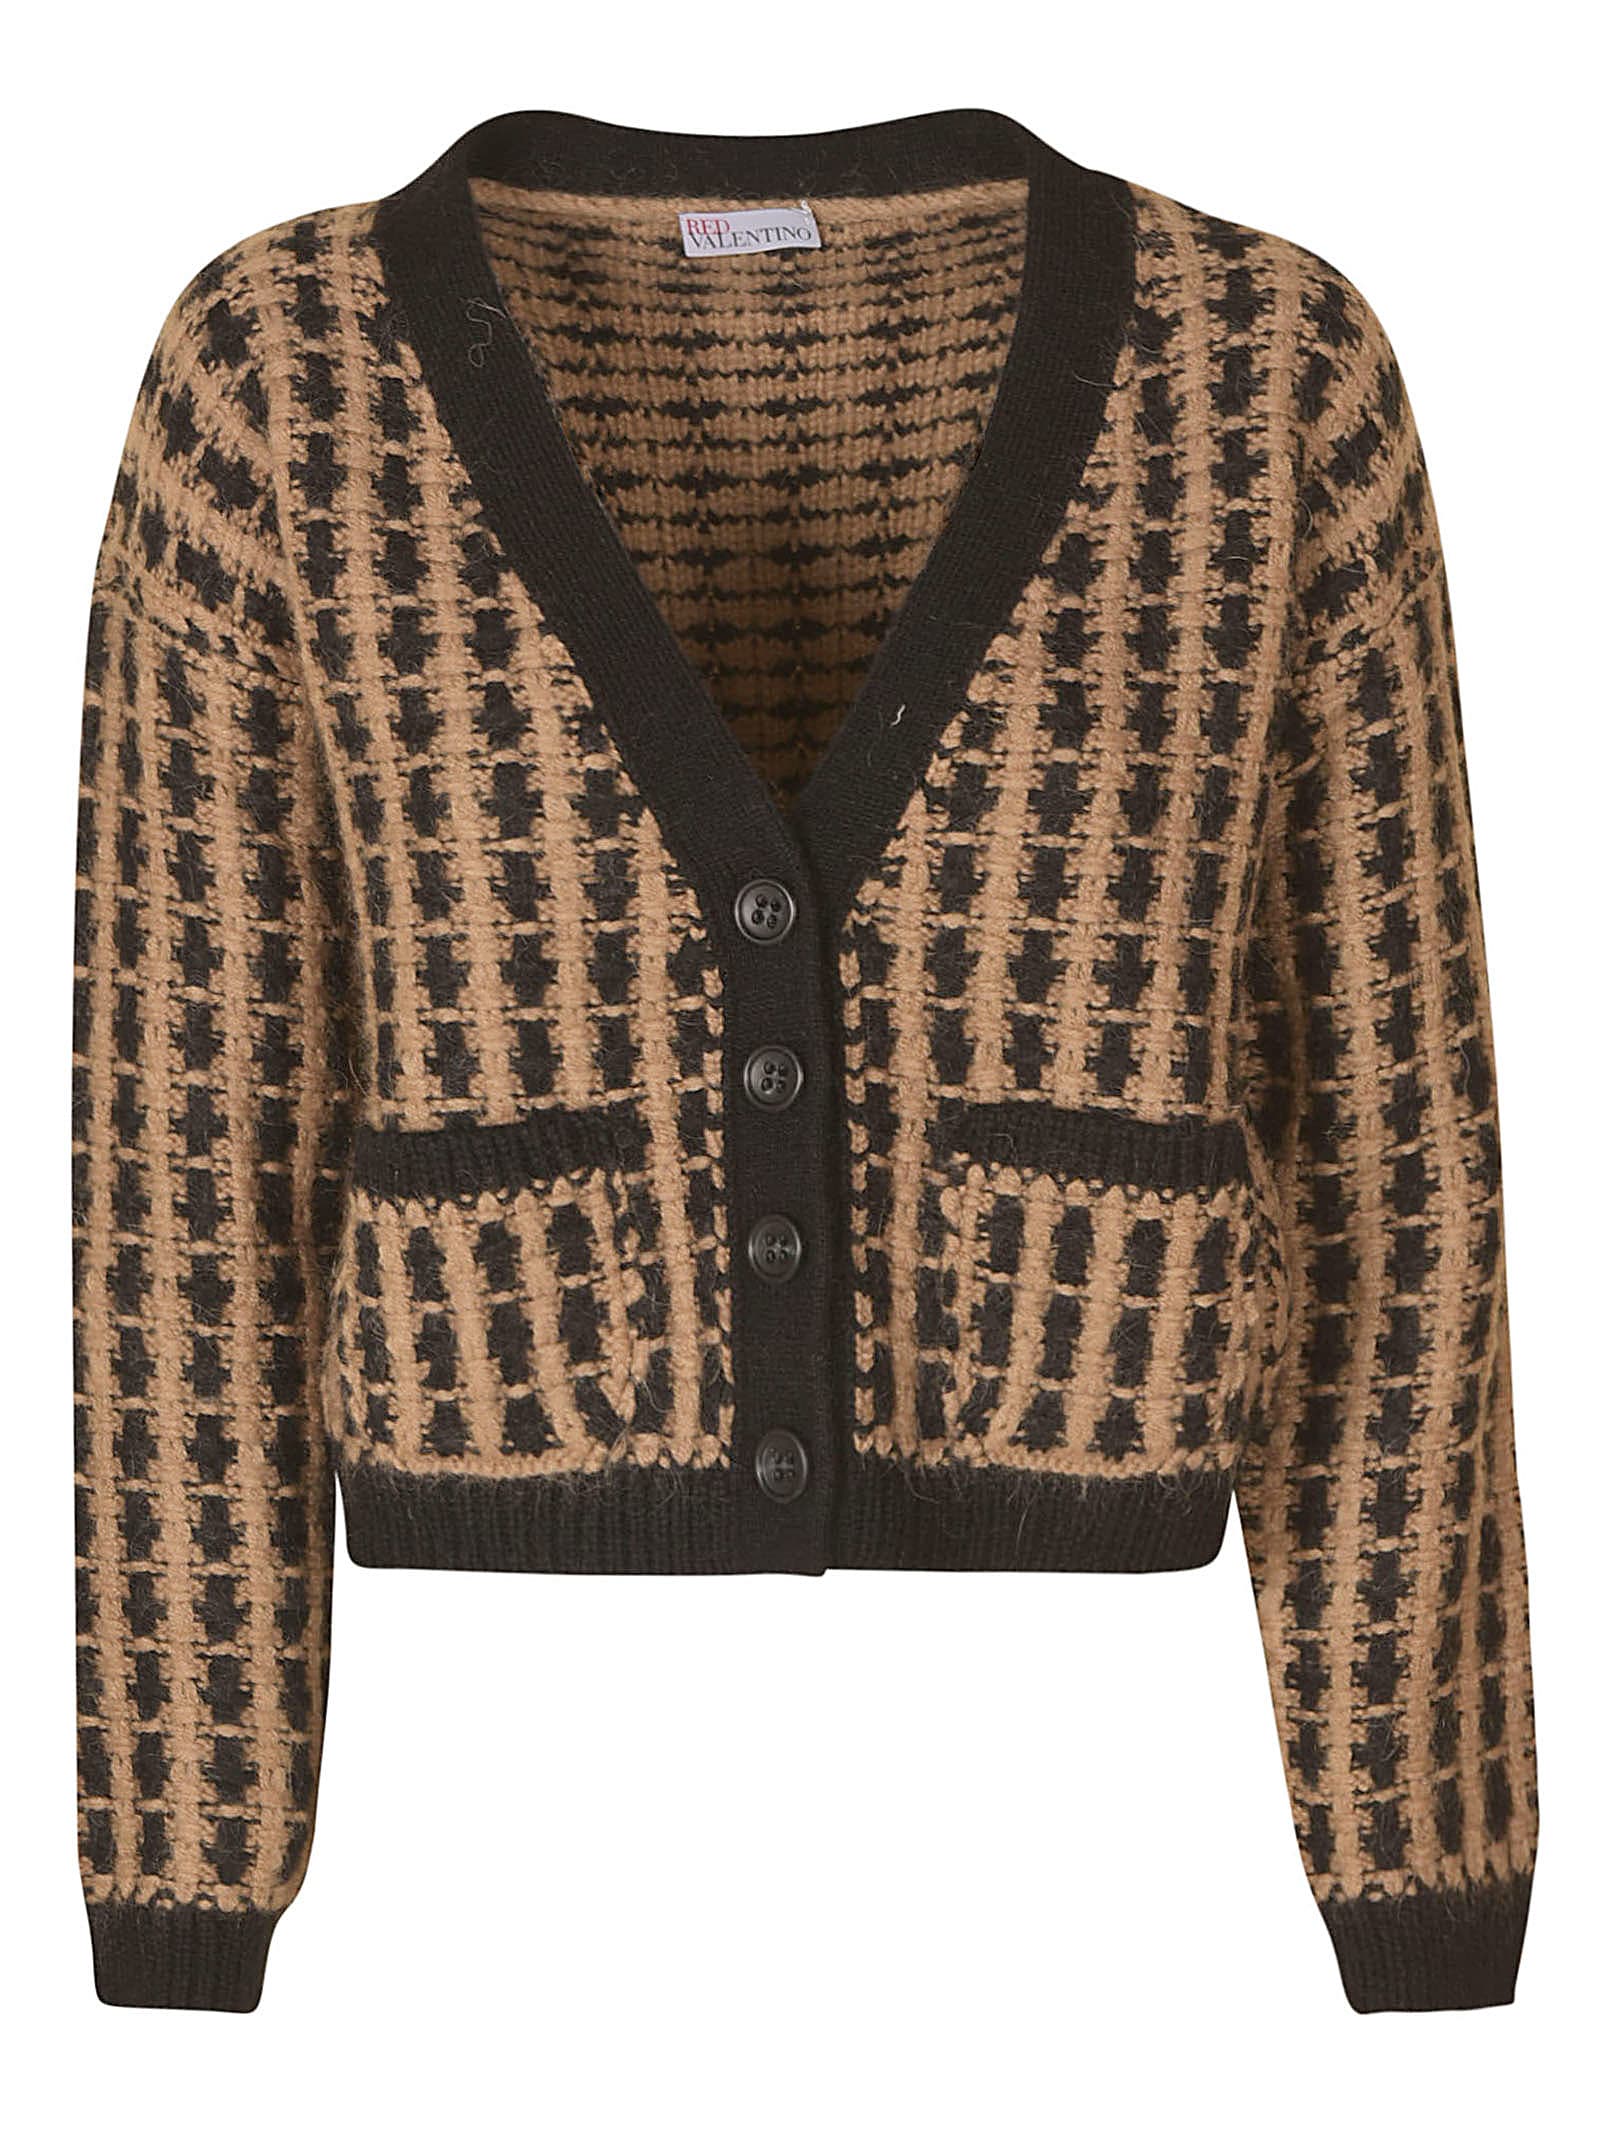 RED Valentino Check Patterned Knit Cardigan